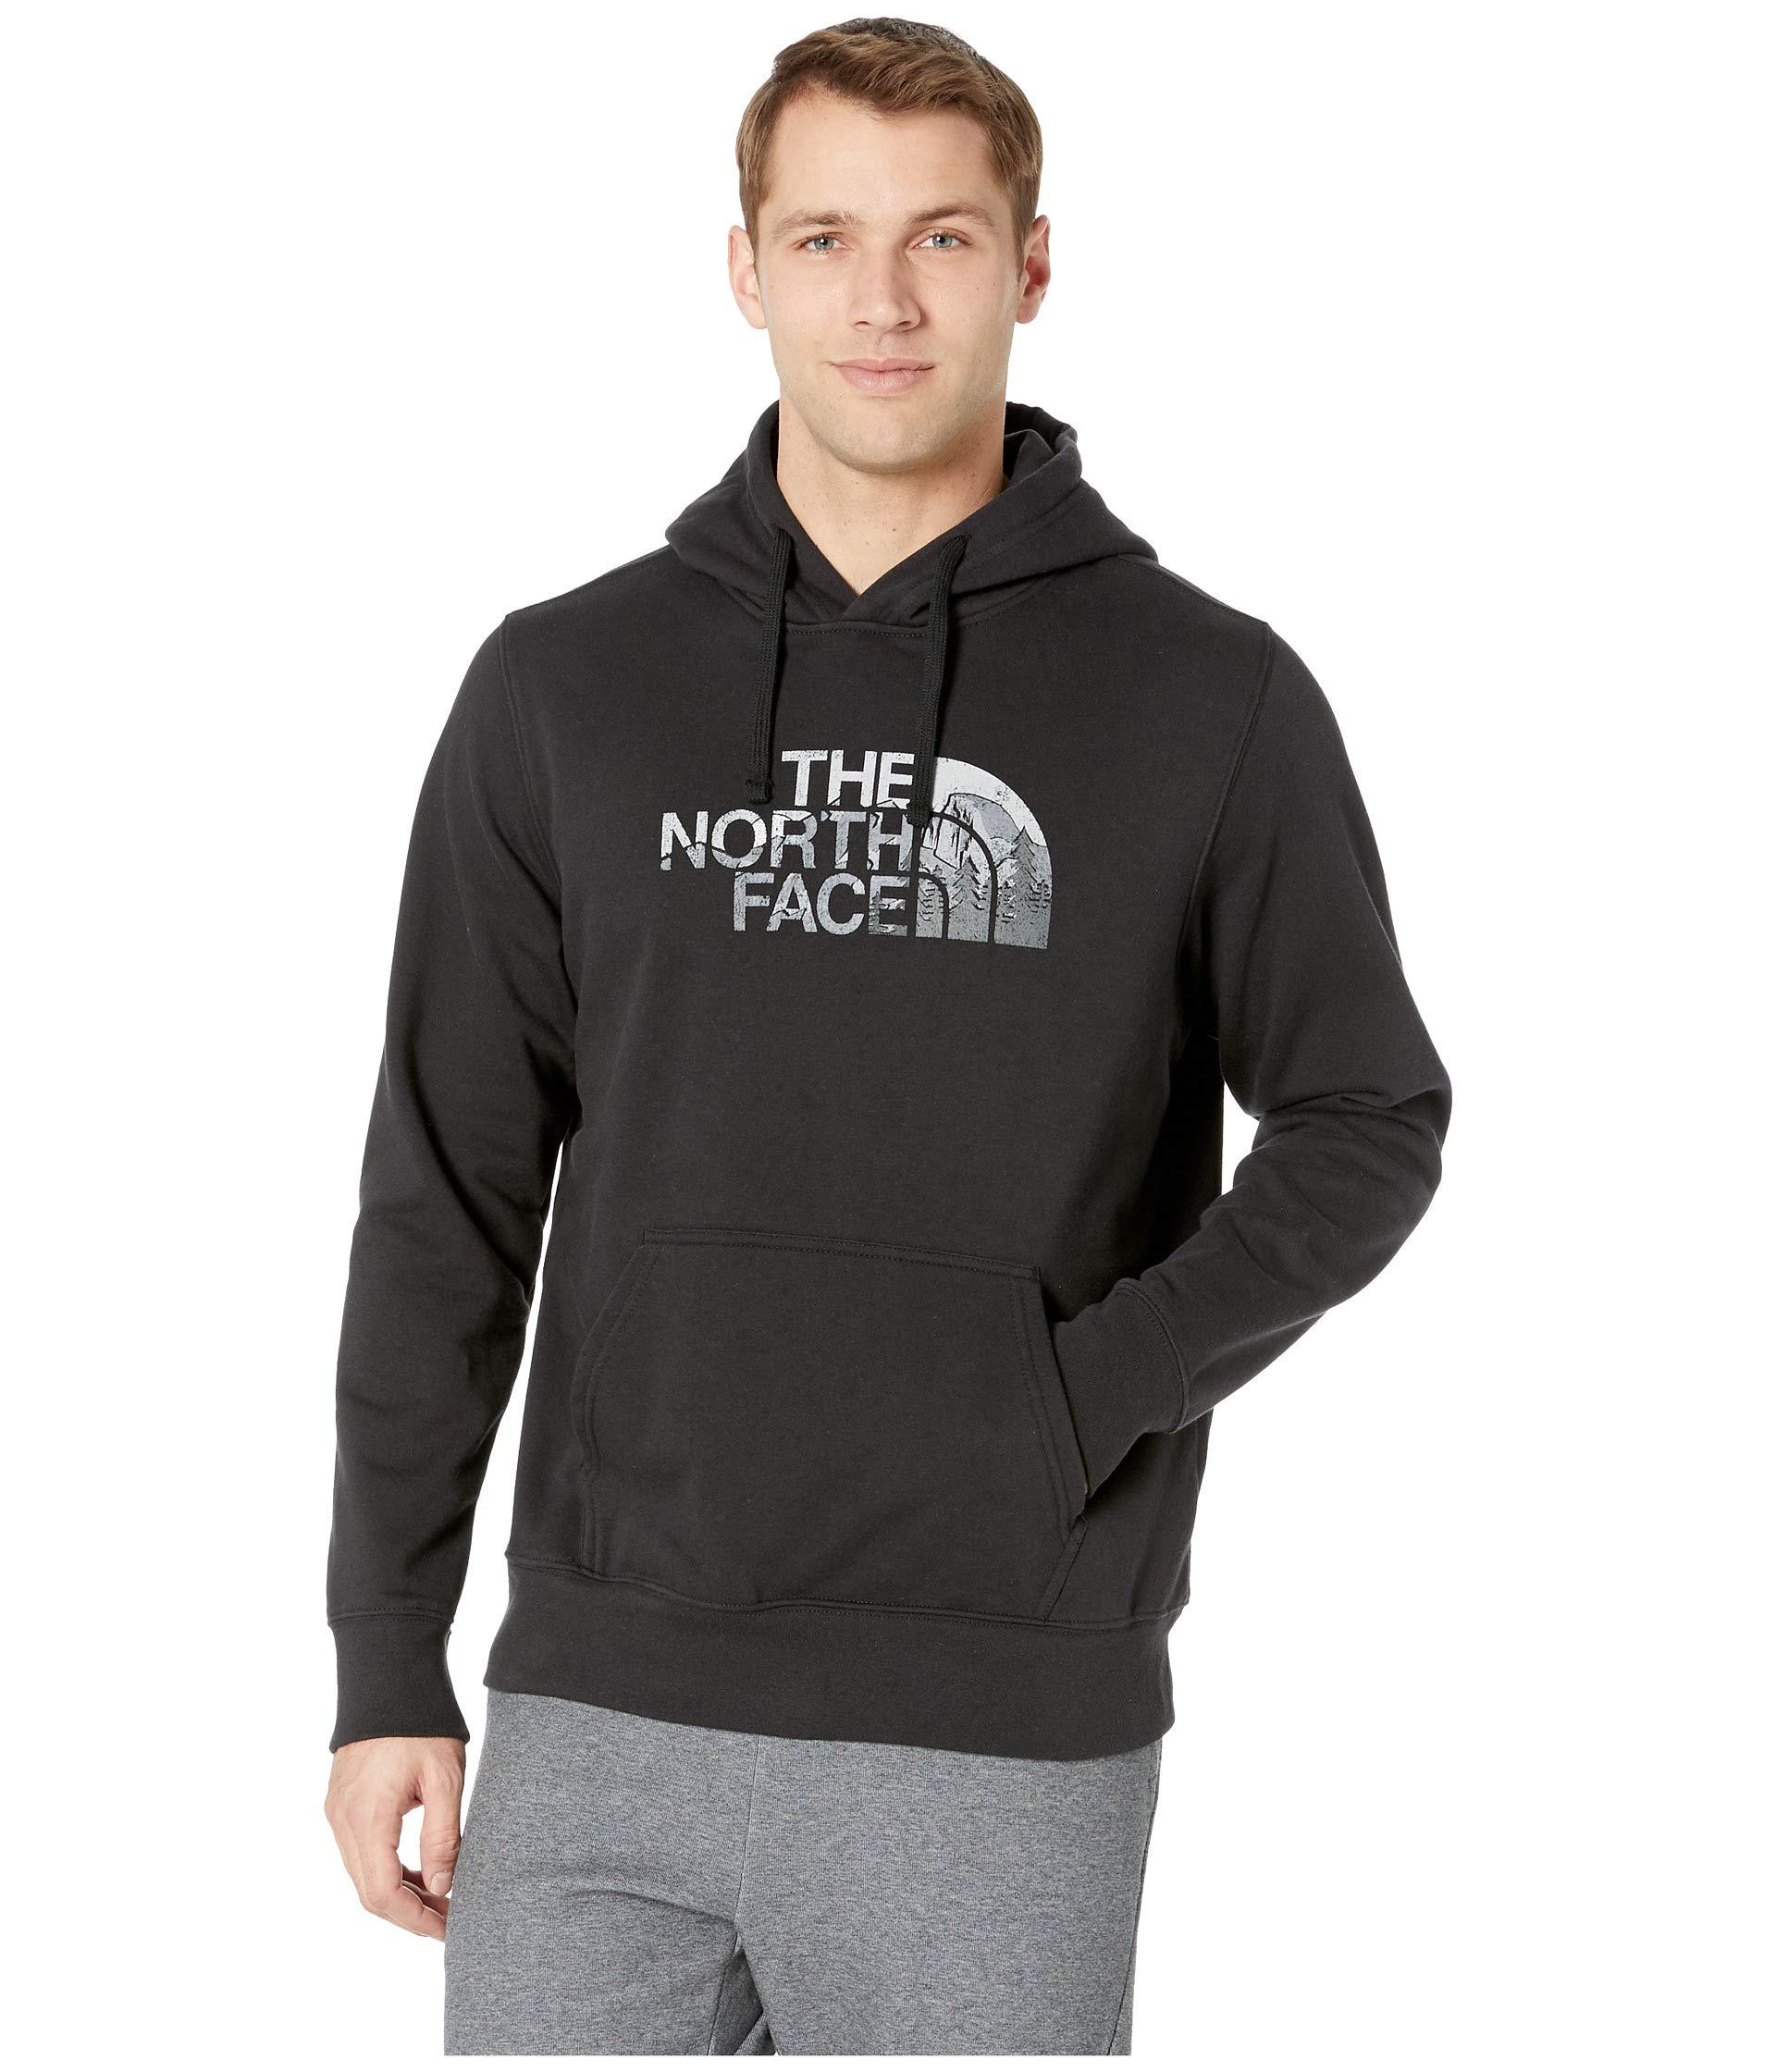 The North Face Cotton Half Dome Pullover Hoodie in Black for Men - Lyst